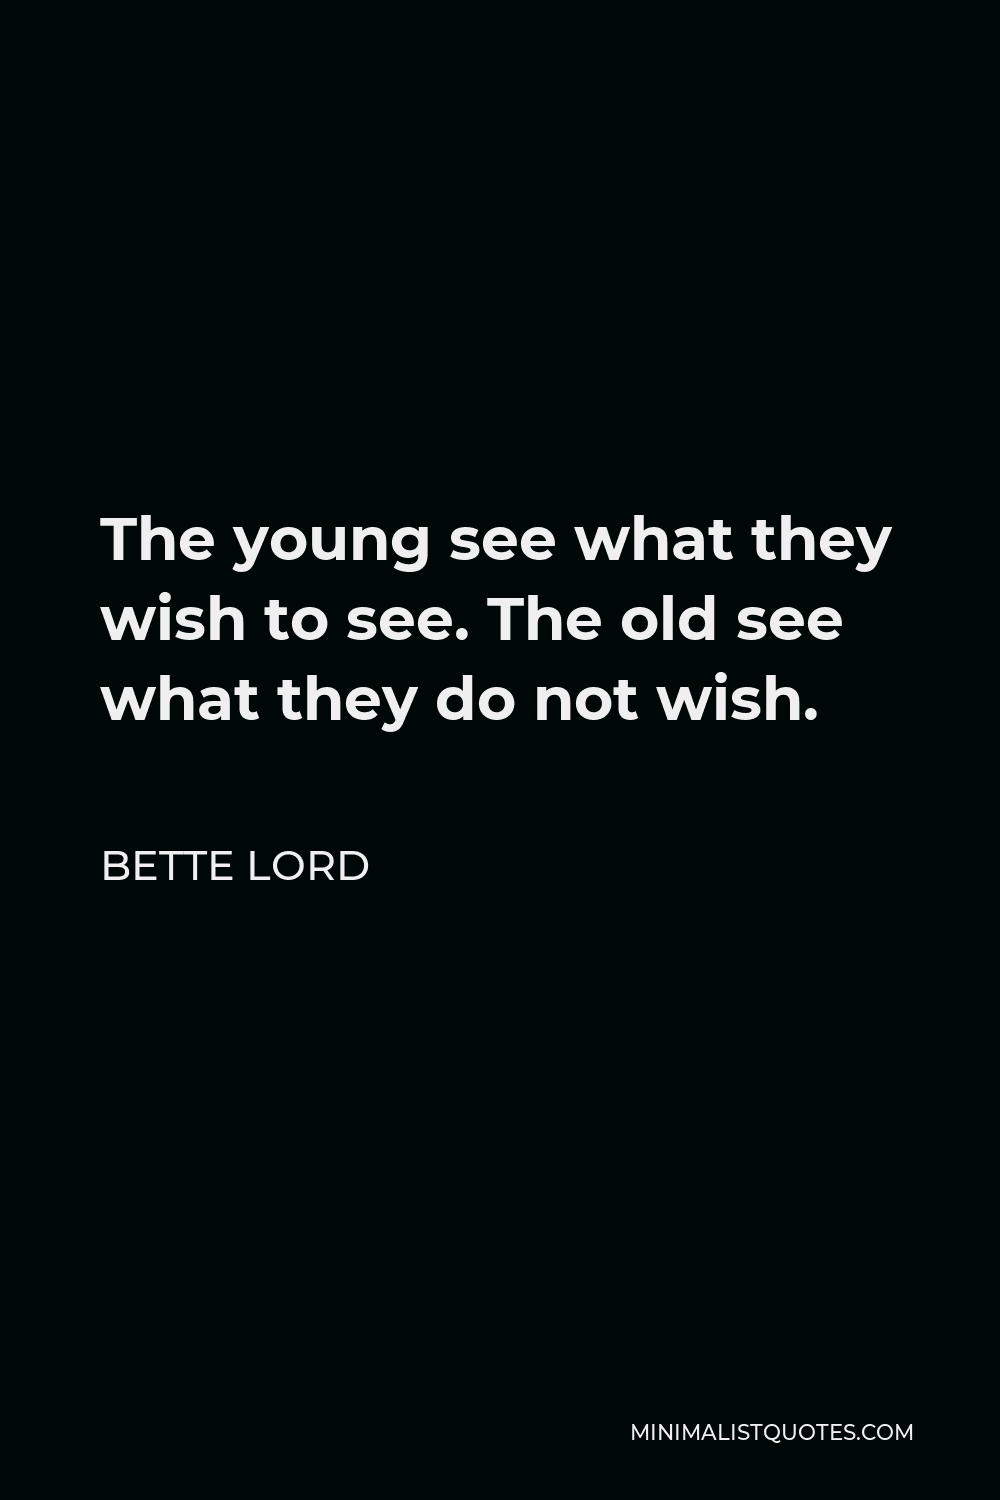 Bette Lord Quote - The young see what they wish to see. The old see what they do not wish.